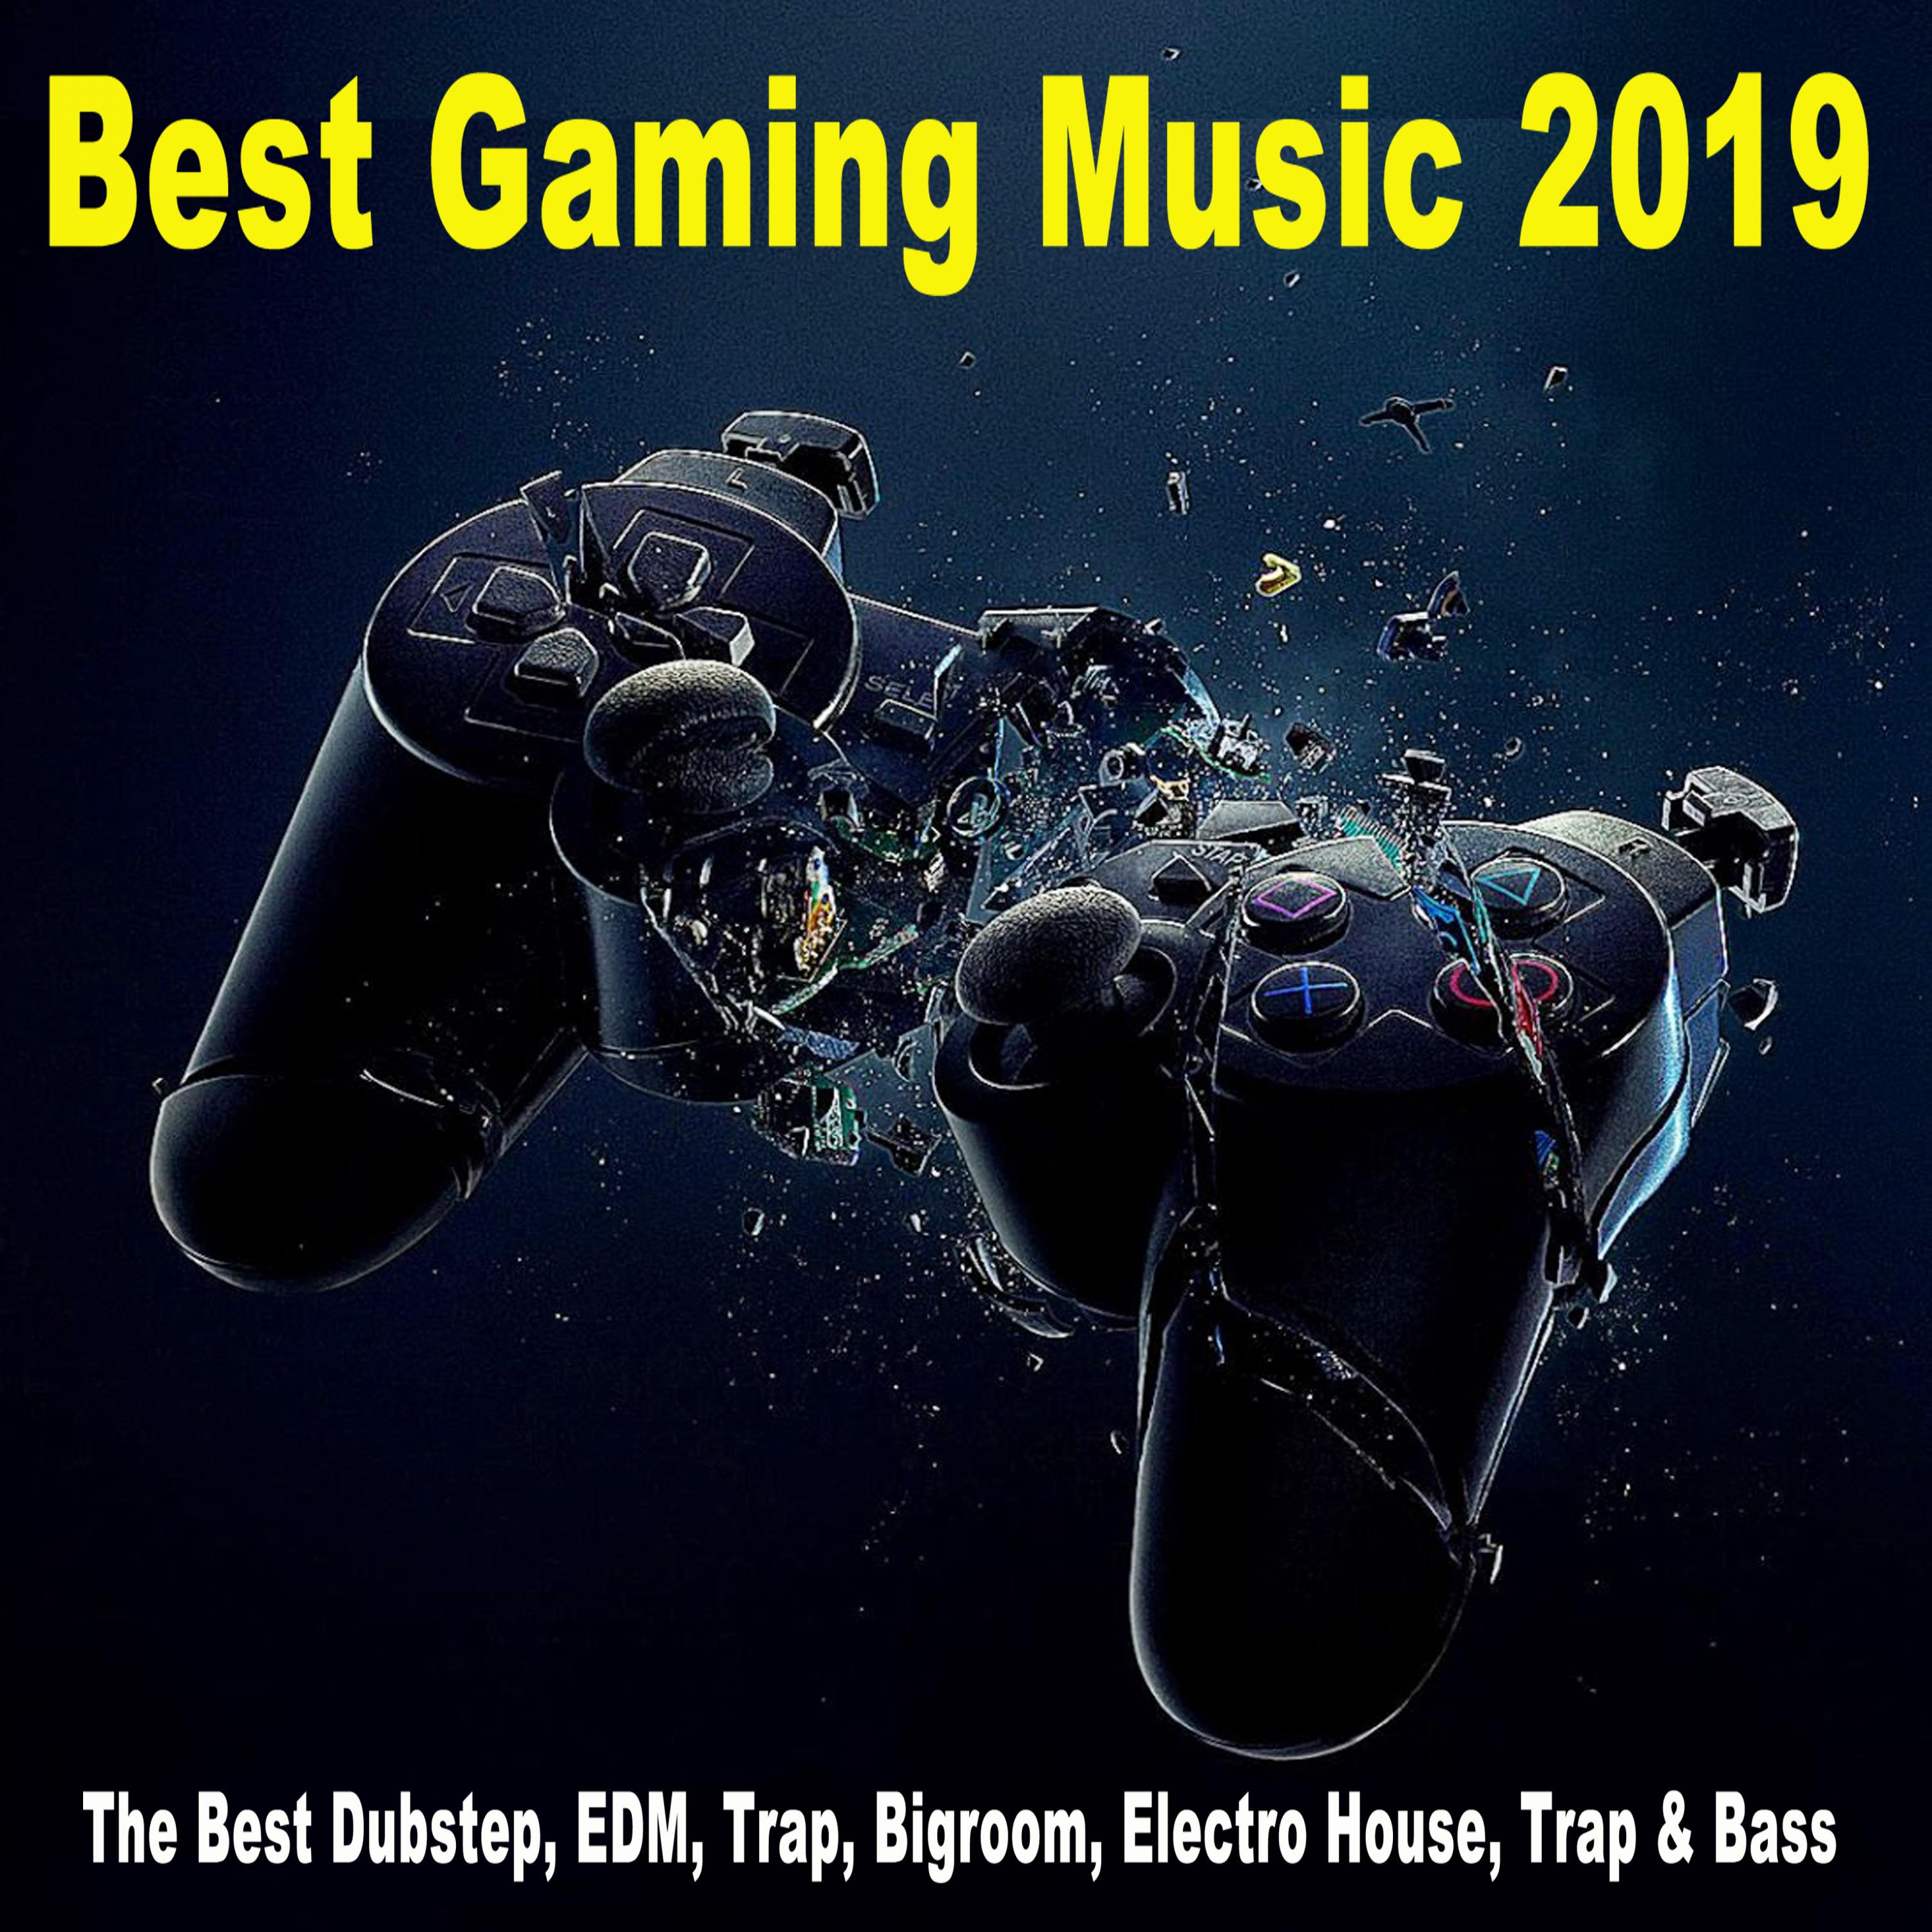 Best Gaming Music 2019 (The Best Dubstep, EDM, Trap, Bigroom, Electro House, Trap & Bass)